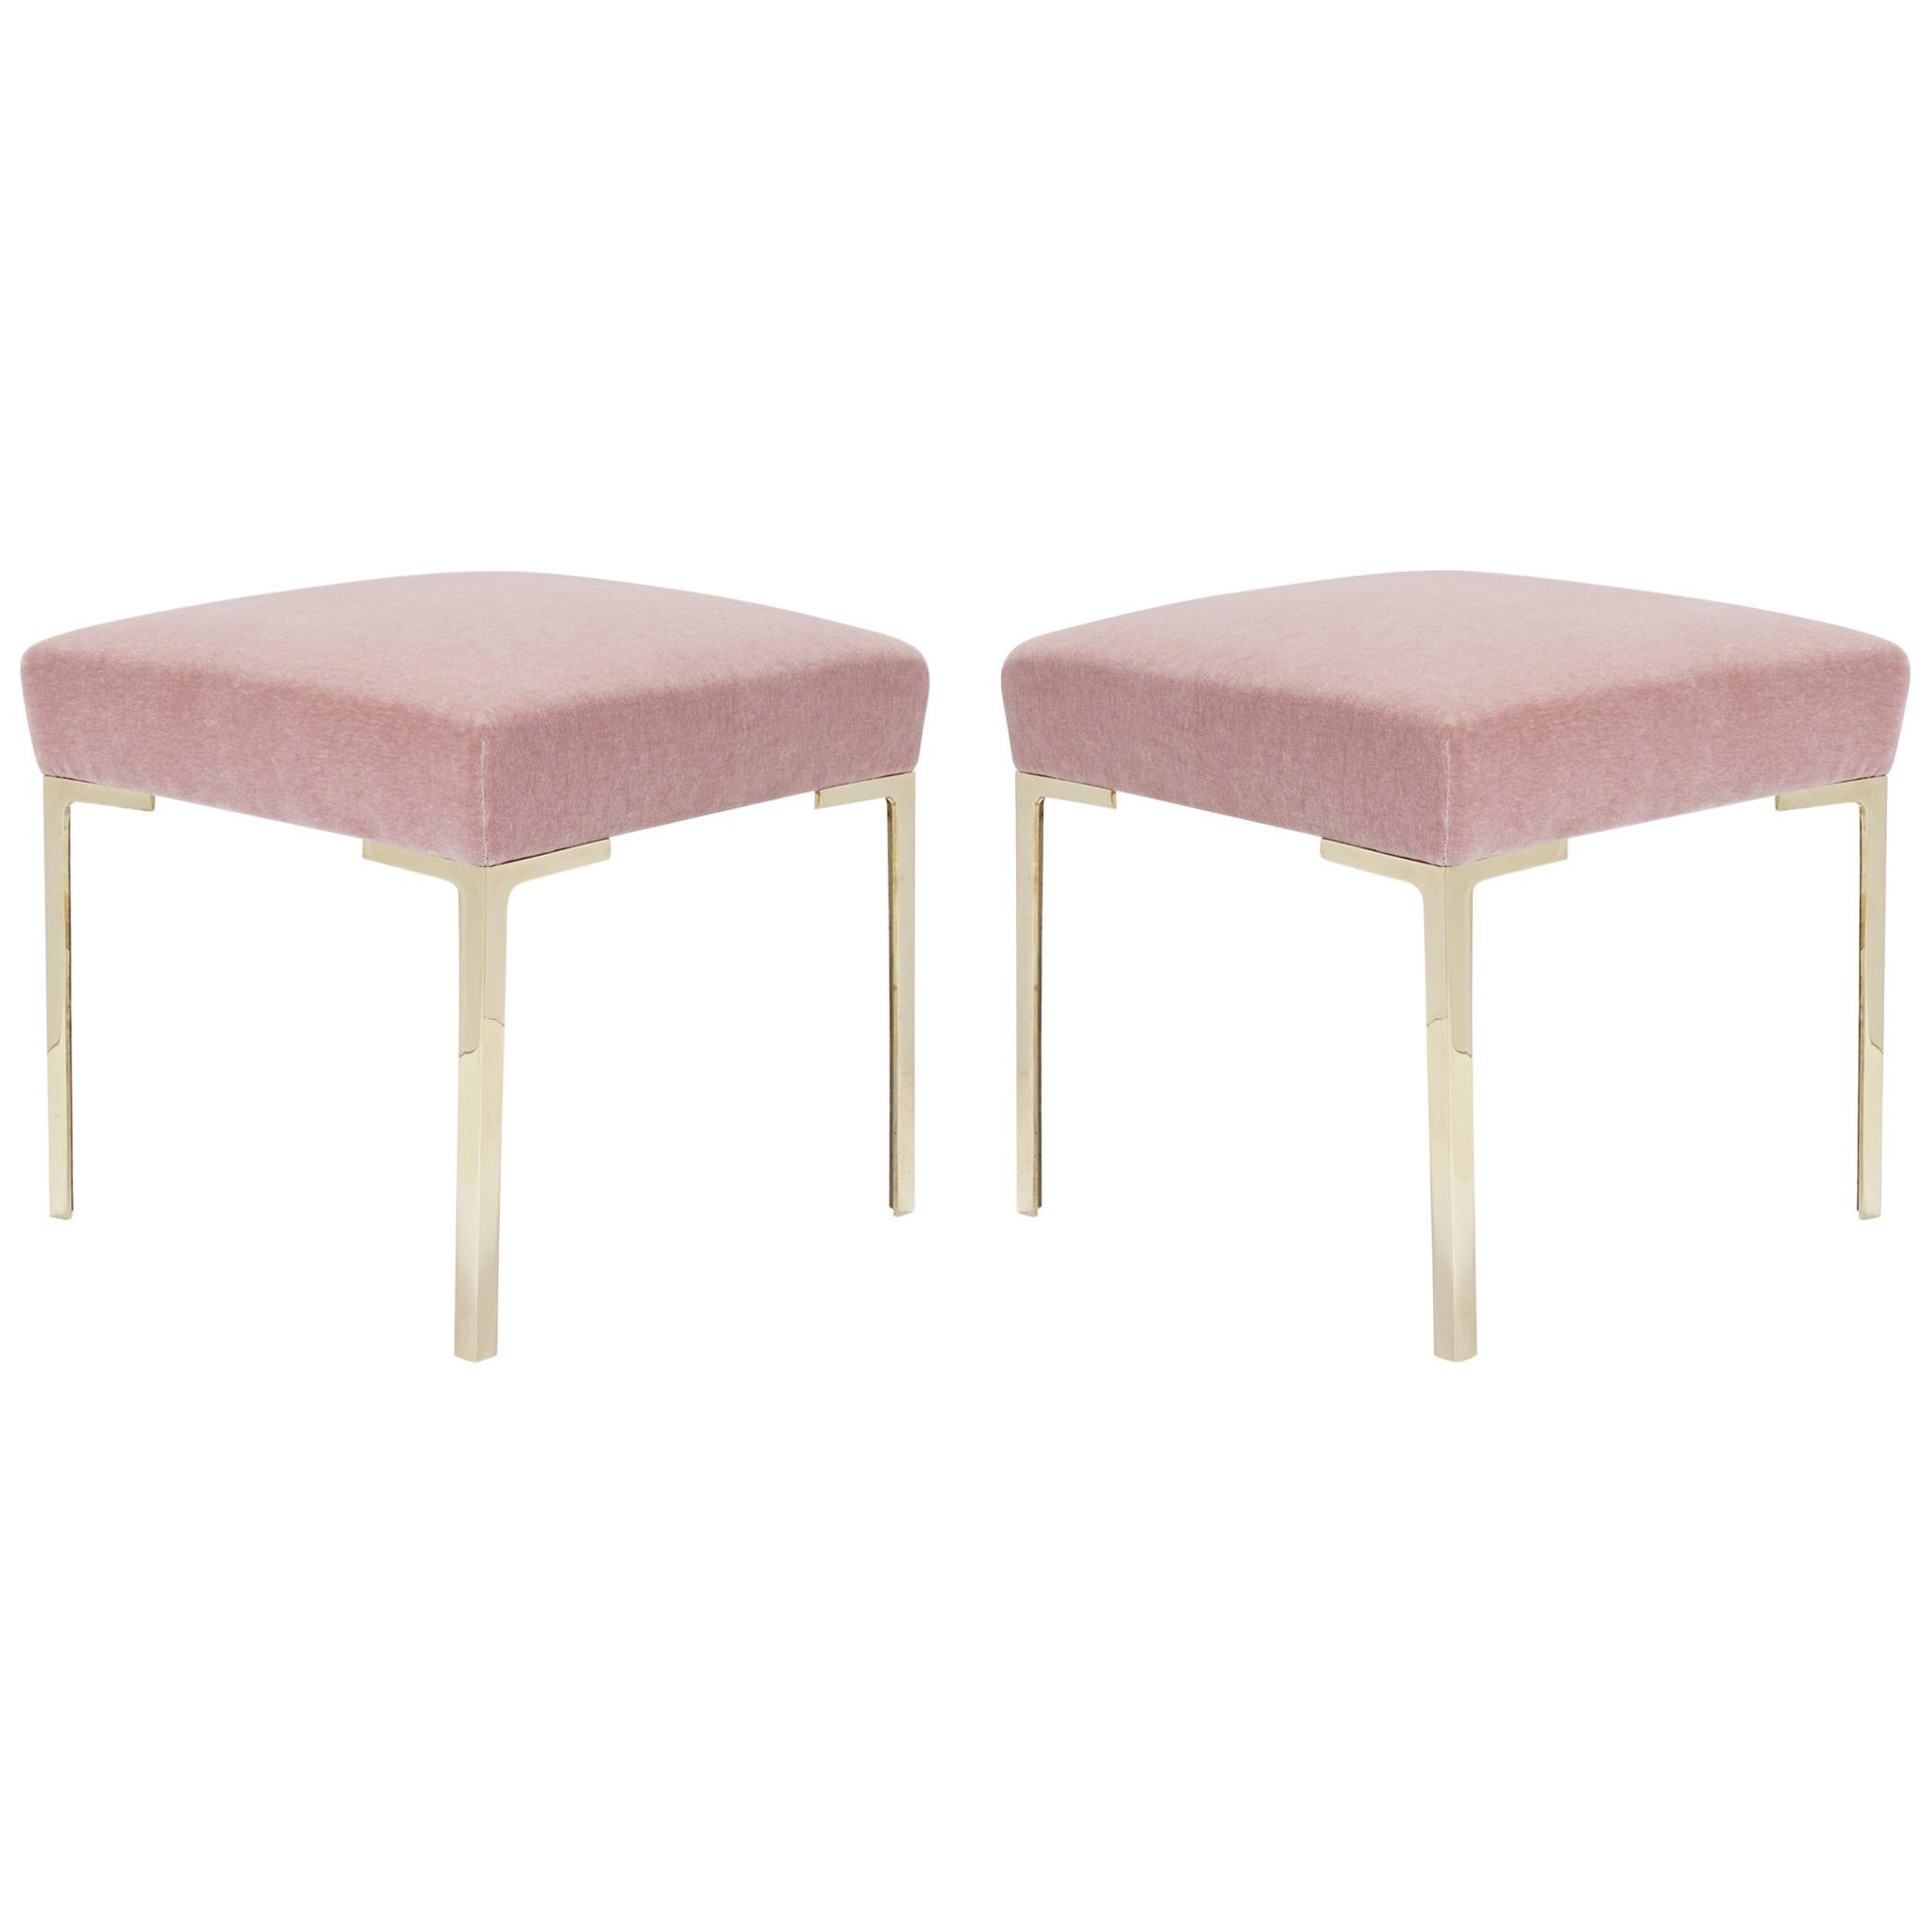 Astor Petite Brass Ottomans in Blush Mohair by Montage, Pair